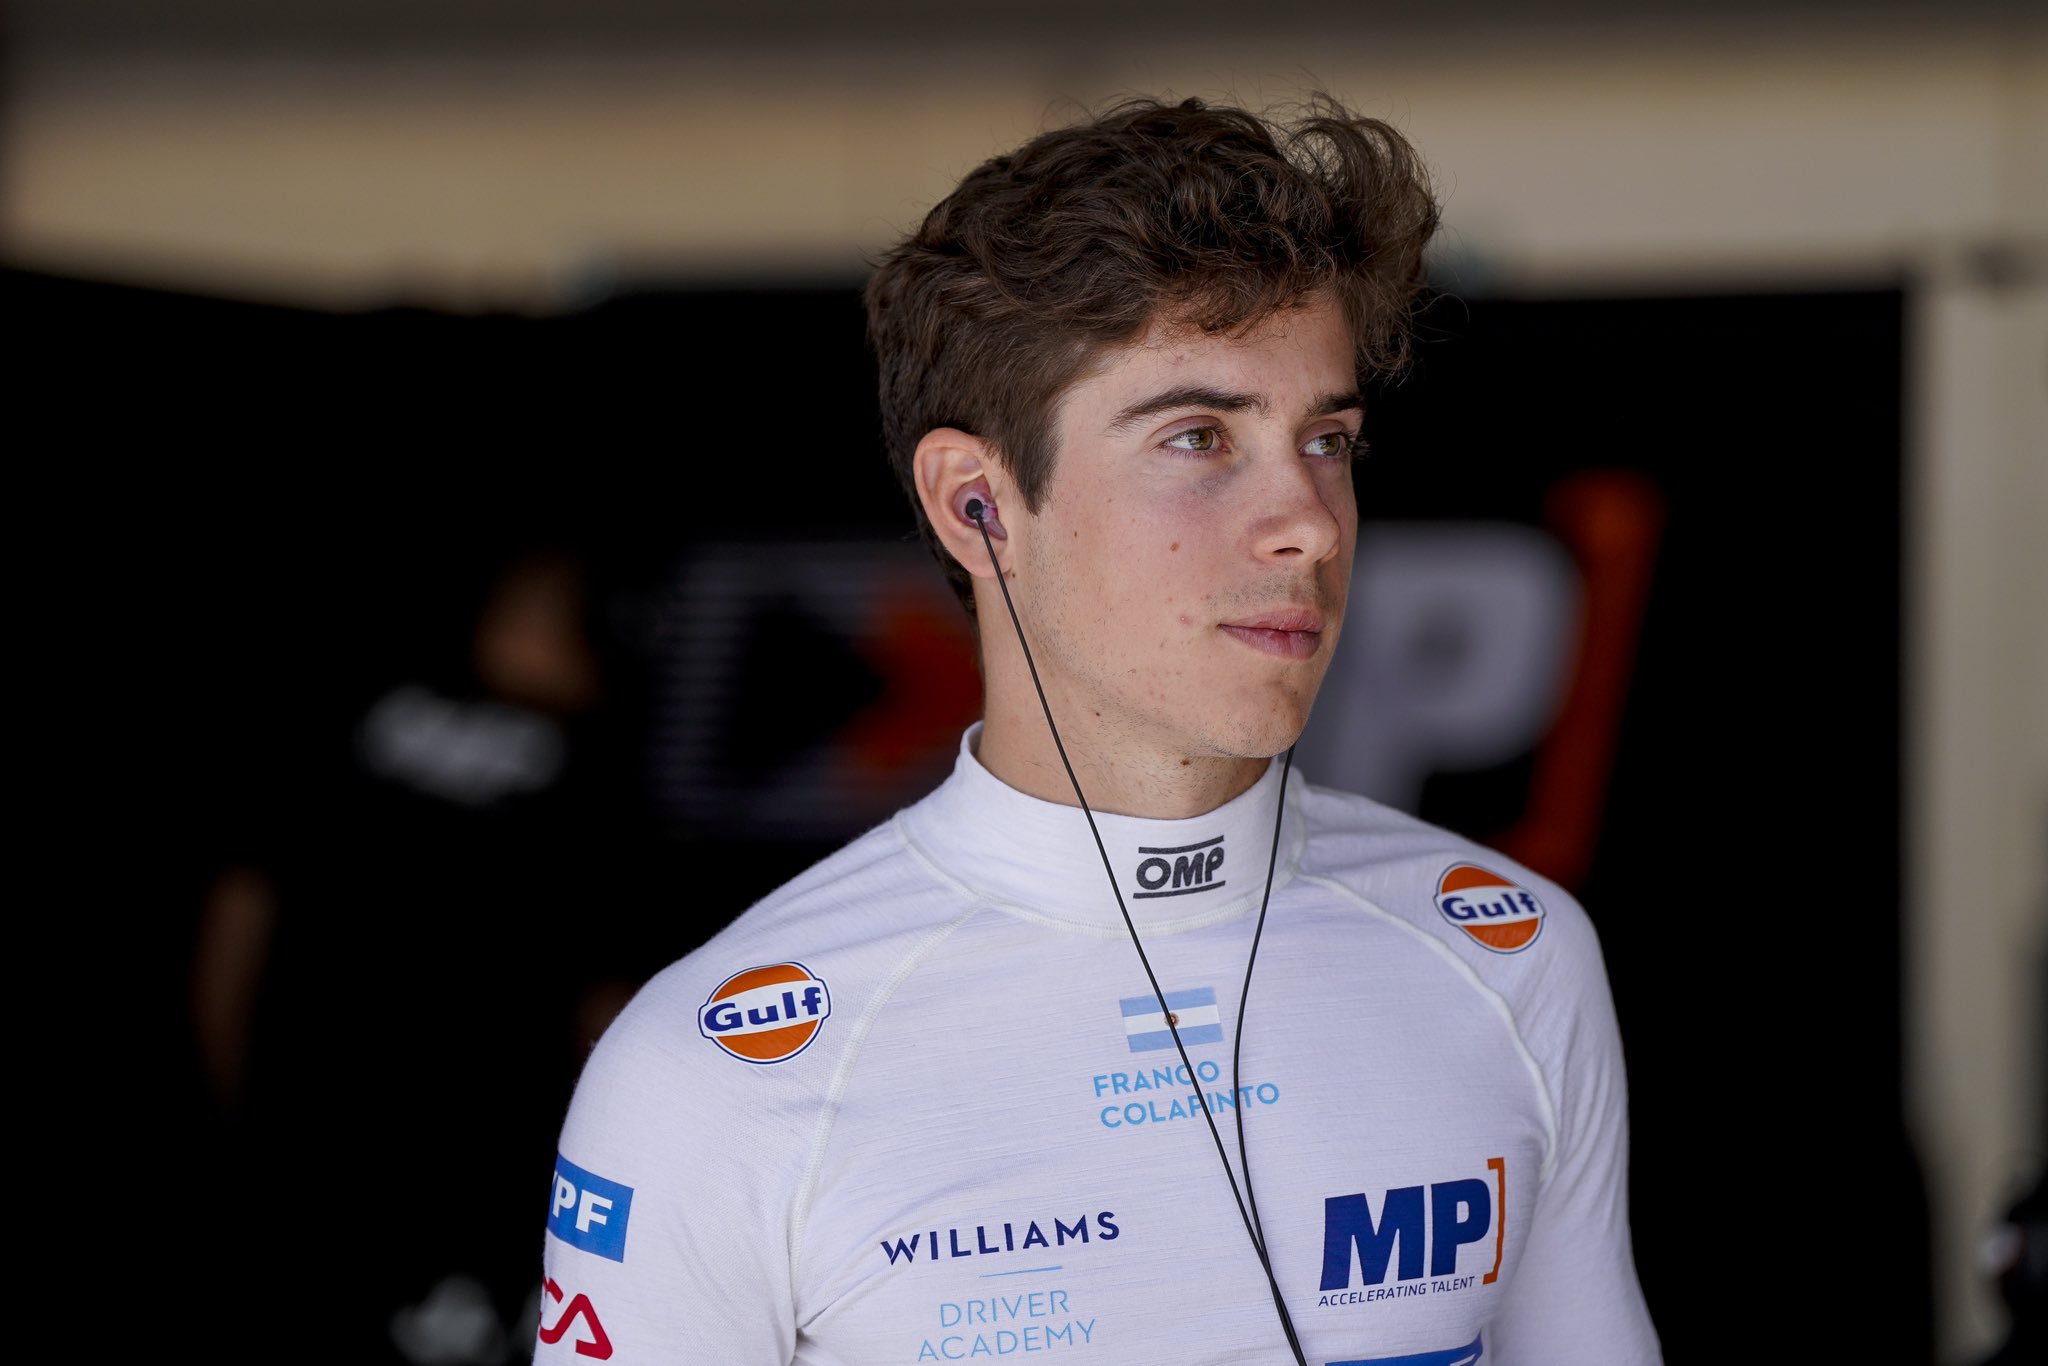 Bullet Sports Management on Twitter: "Your Poleman for tomorrow's @fiaf3 Sprint Race : @francolapinto! 🇦🇷 Franco finished in P12 in qualifying, snatching the reverse grid pole for tomorrow's race. Vamosssss Franco! 🙌